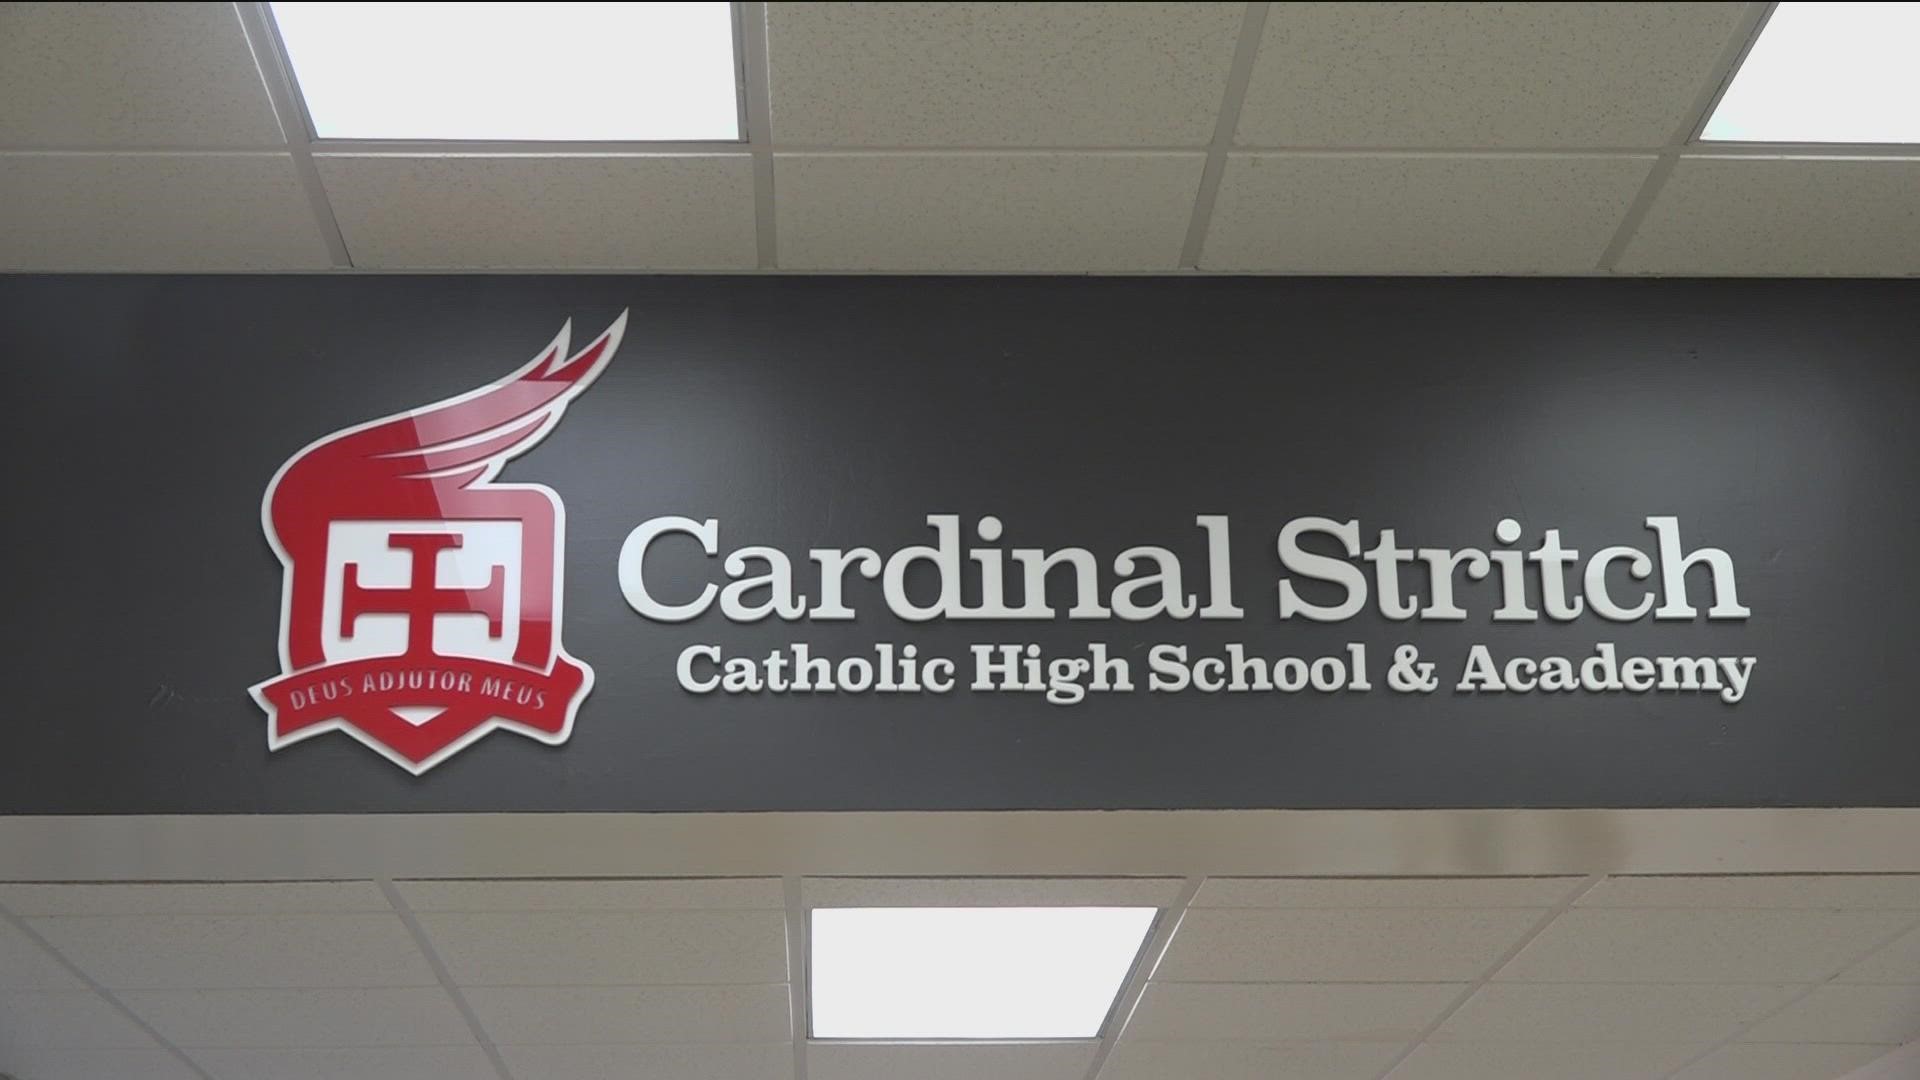 Amy Steigerwald went to Cardinal Stritch Catholic High School & Academy to find out more about the many languages students can learn.